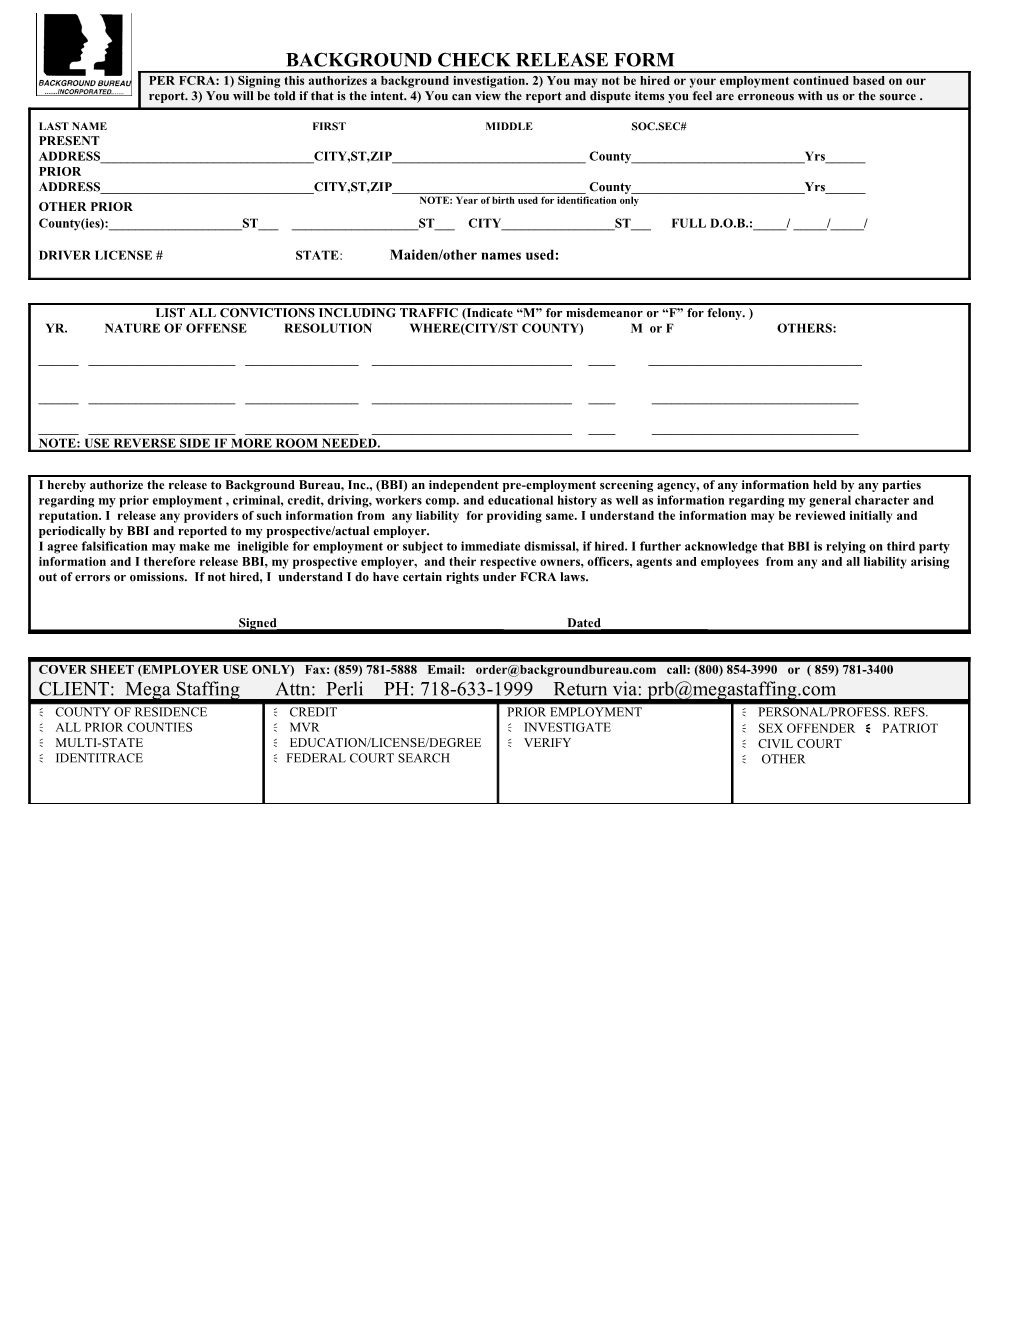 Background Check Release Form